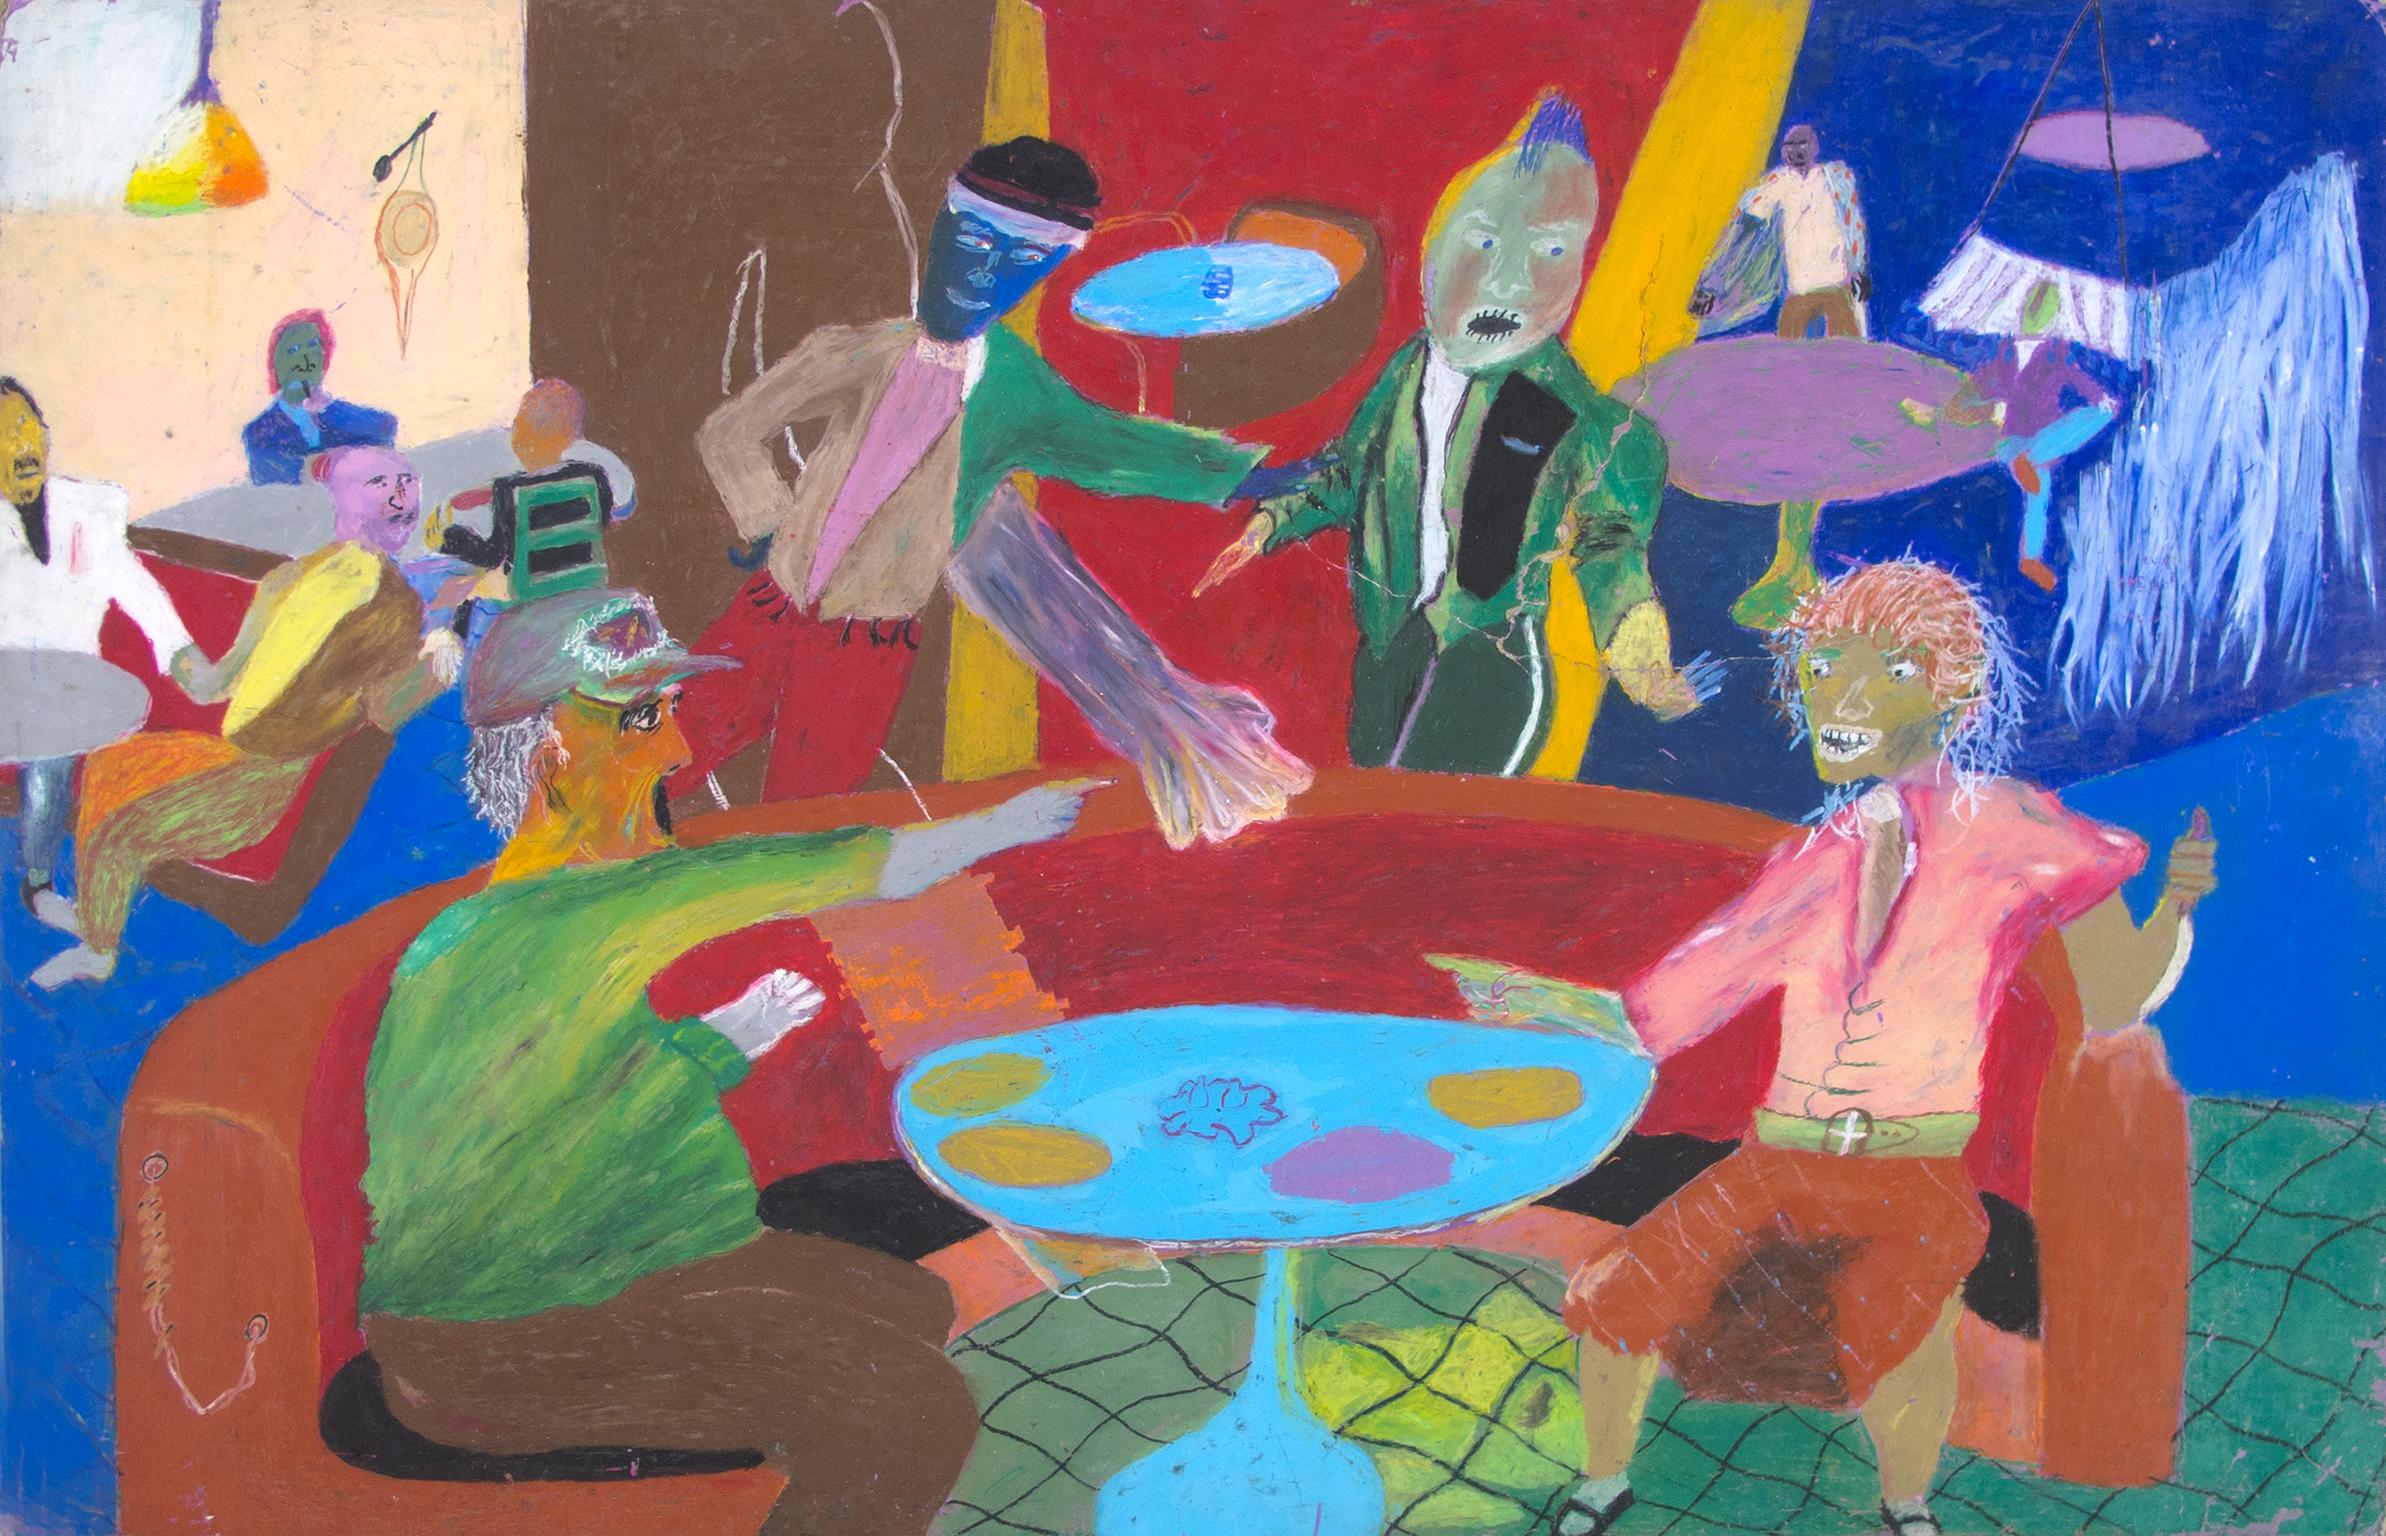 "Faraway From Familiar Sounds" is an original oil pastel drawing on ragboard by Reginald K. Gee. The artist signed the piece on the back. It depicts a number of abstracted figures seated in a diner. 

28" x 44" art

Reginald K. Gee was born in